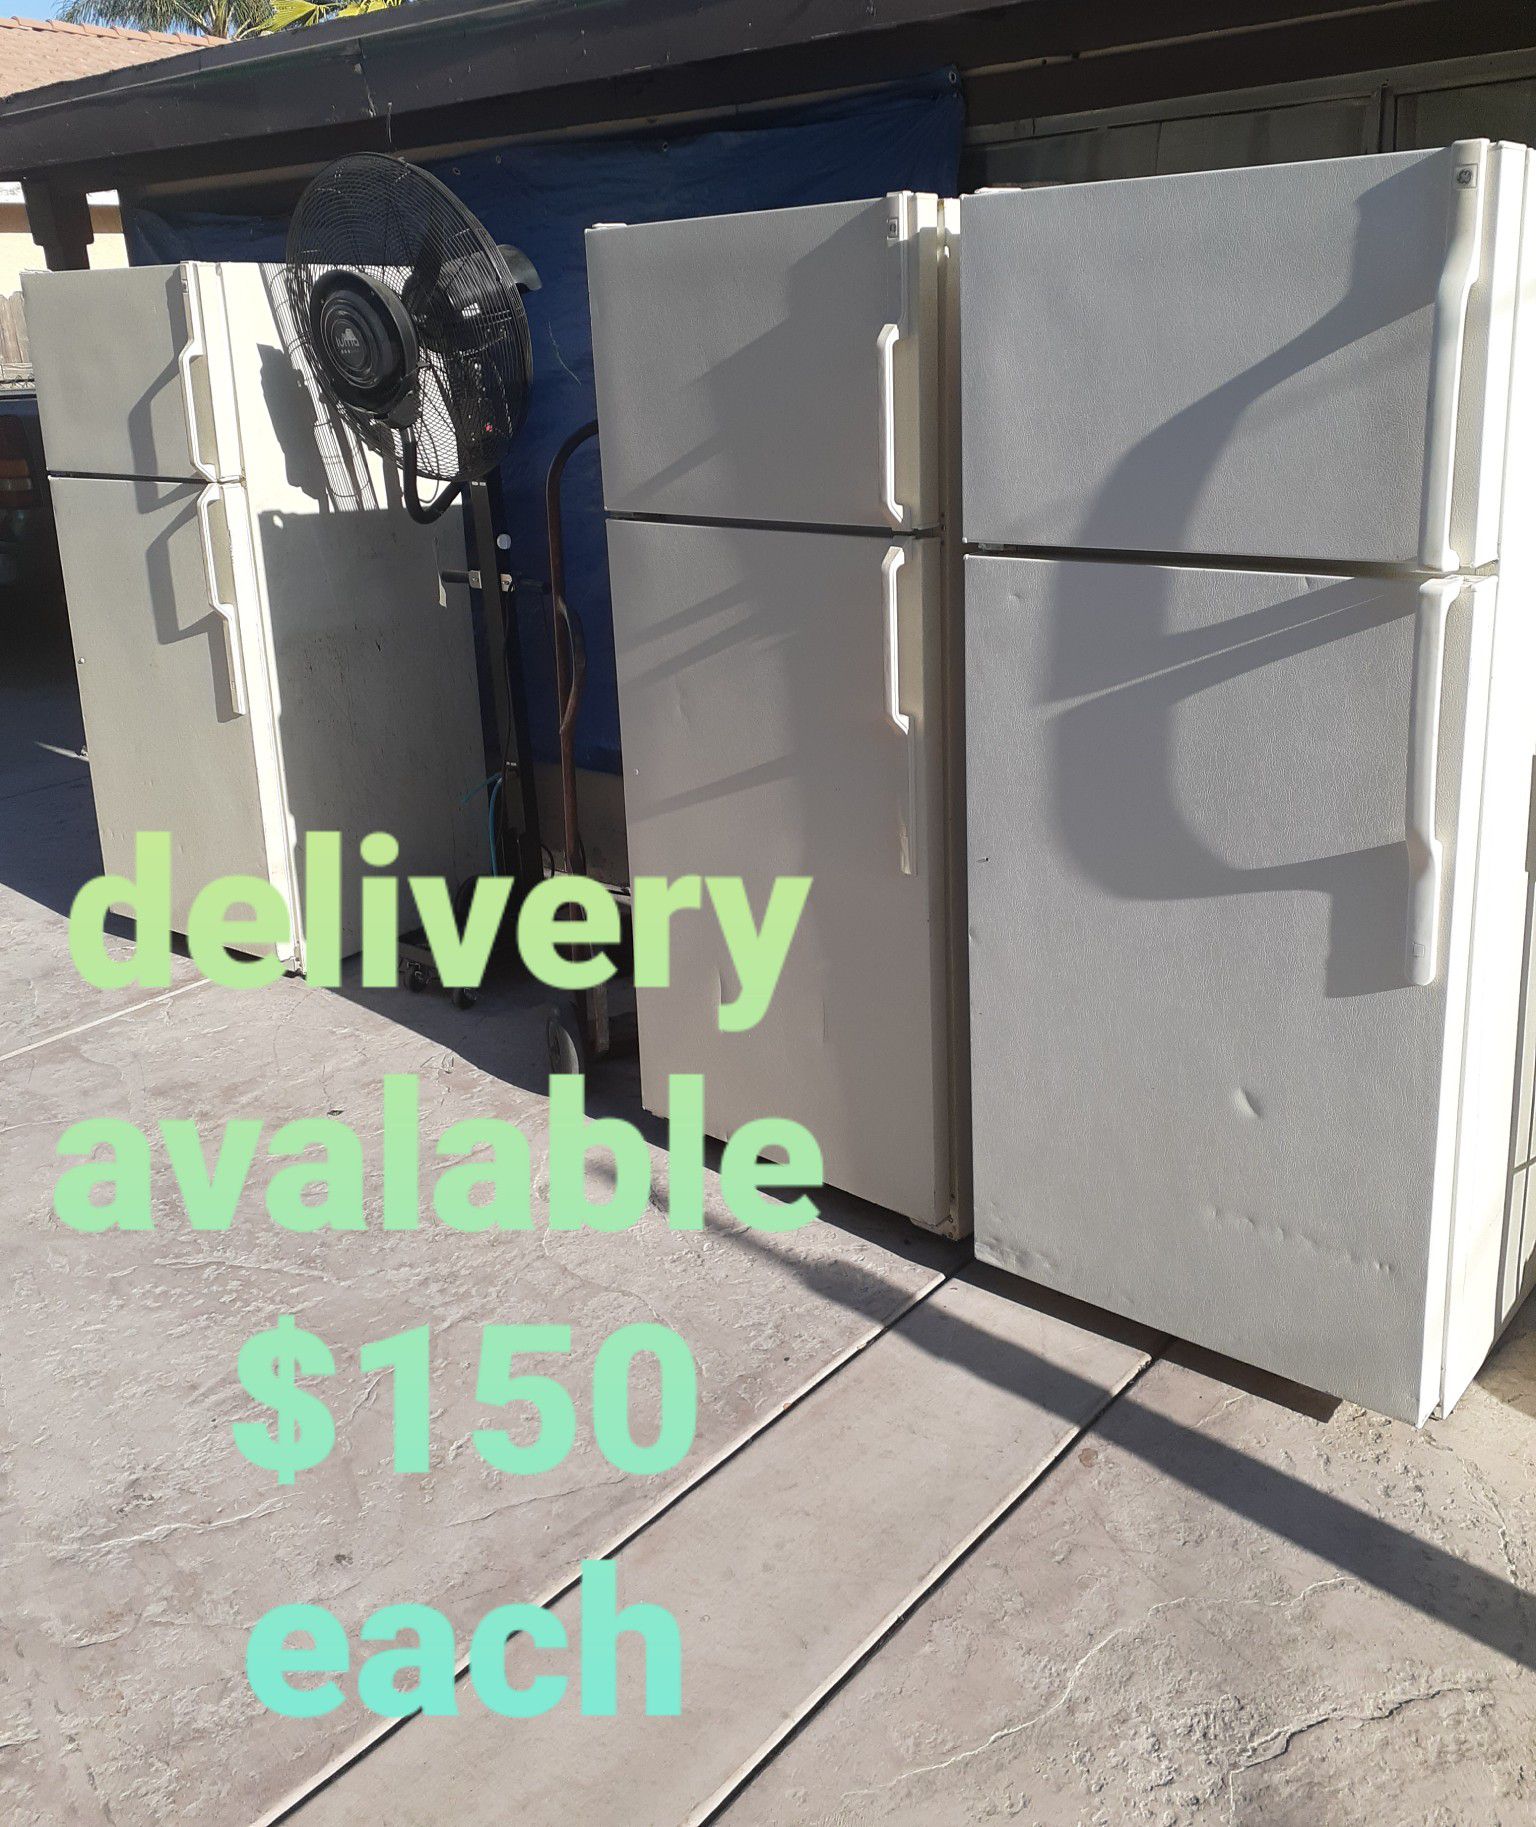 fridge refri refrigerador refrigerator delivered apartment sized stainless whirlpool Samsung fridgidare Kenmore delivery available appliance